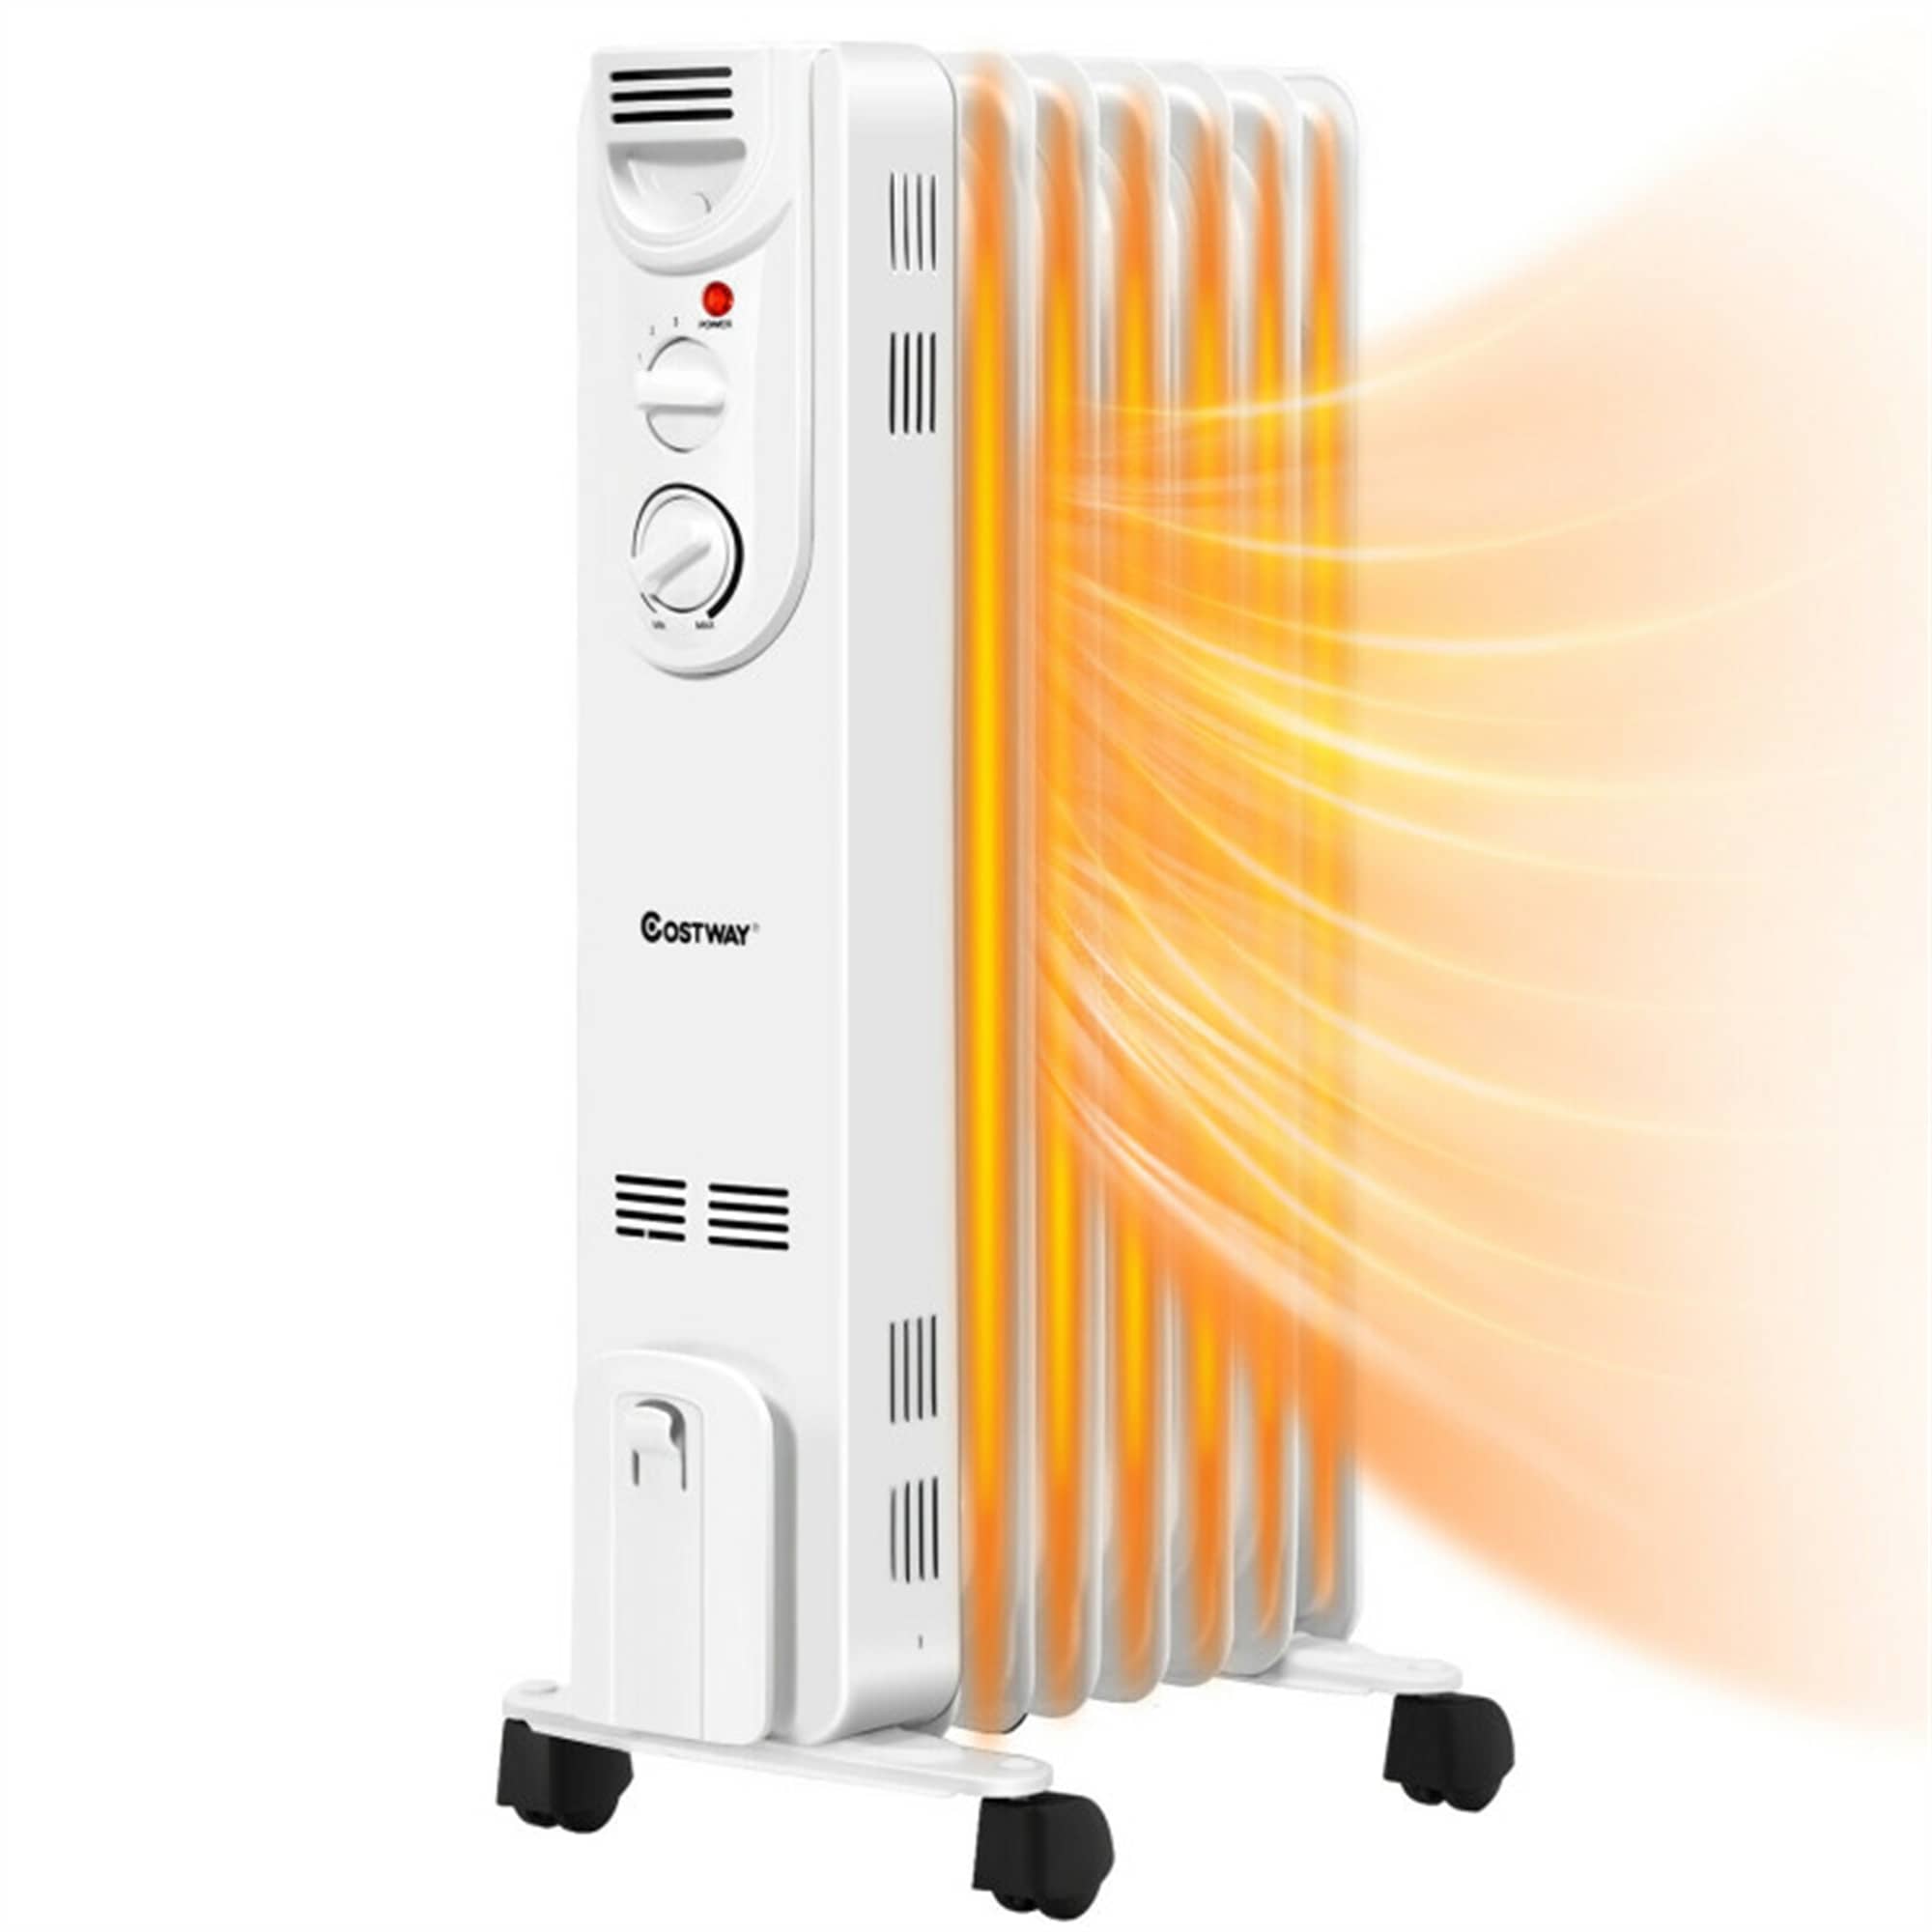 CASAINC 1500W Electric Oil Heater with 3 Heat Settings and Safe Protection